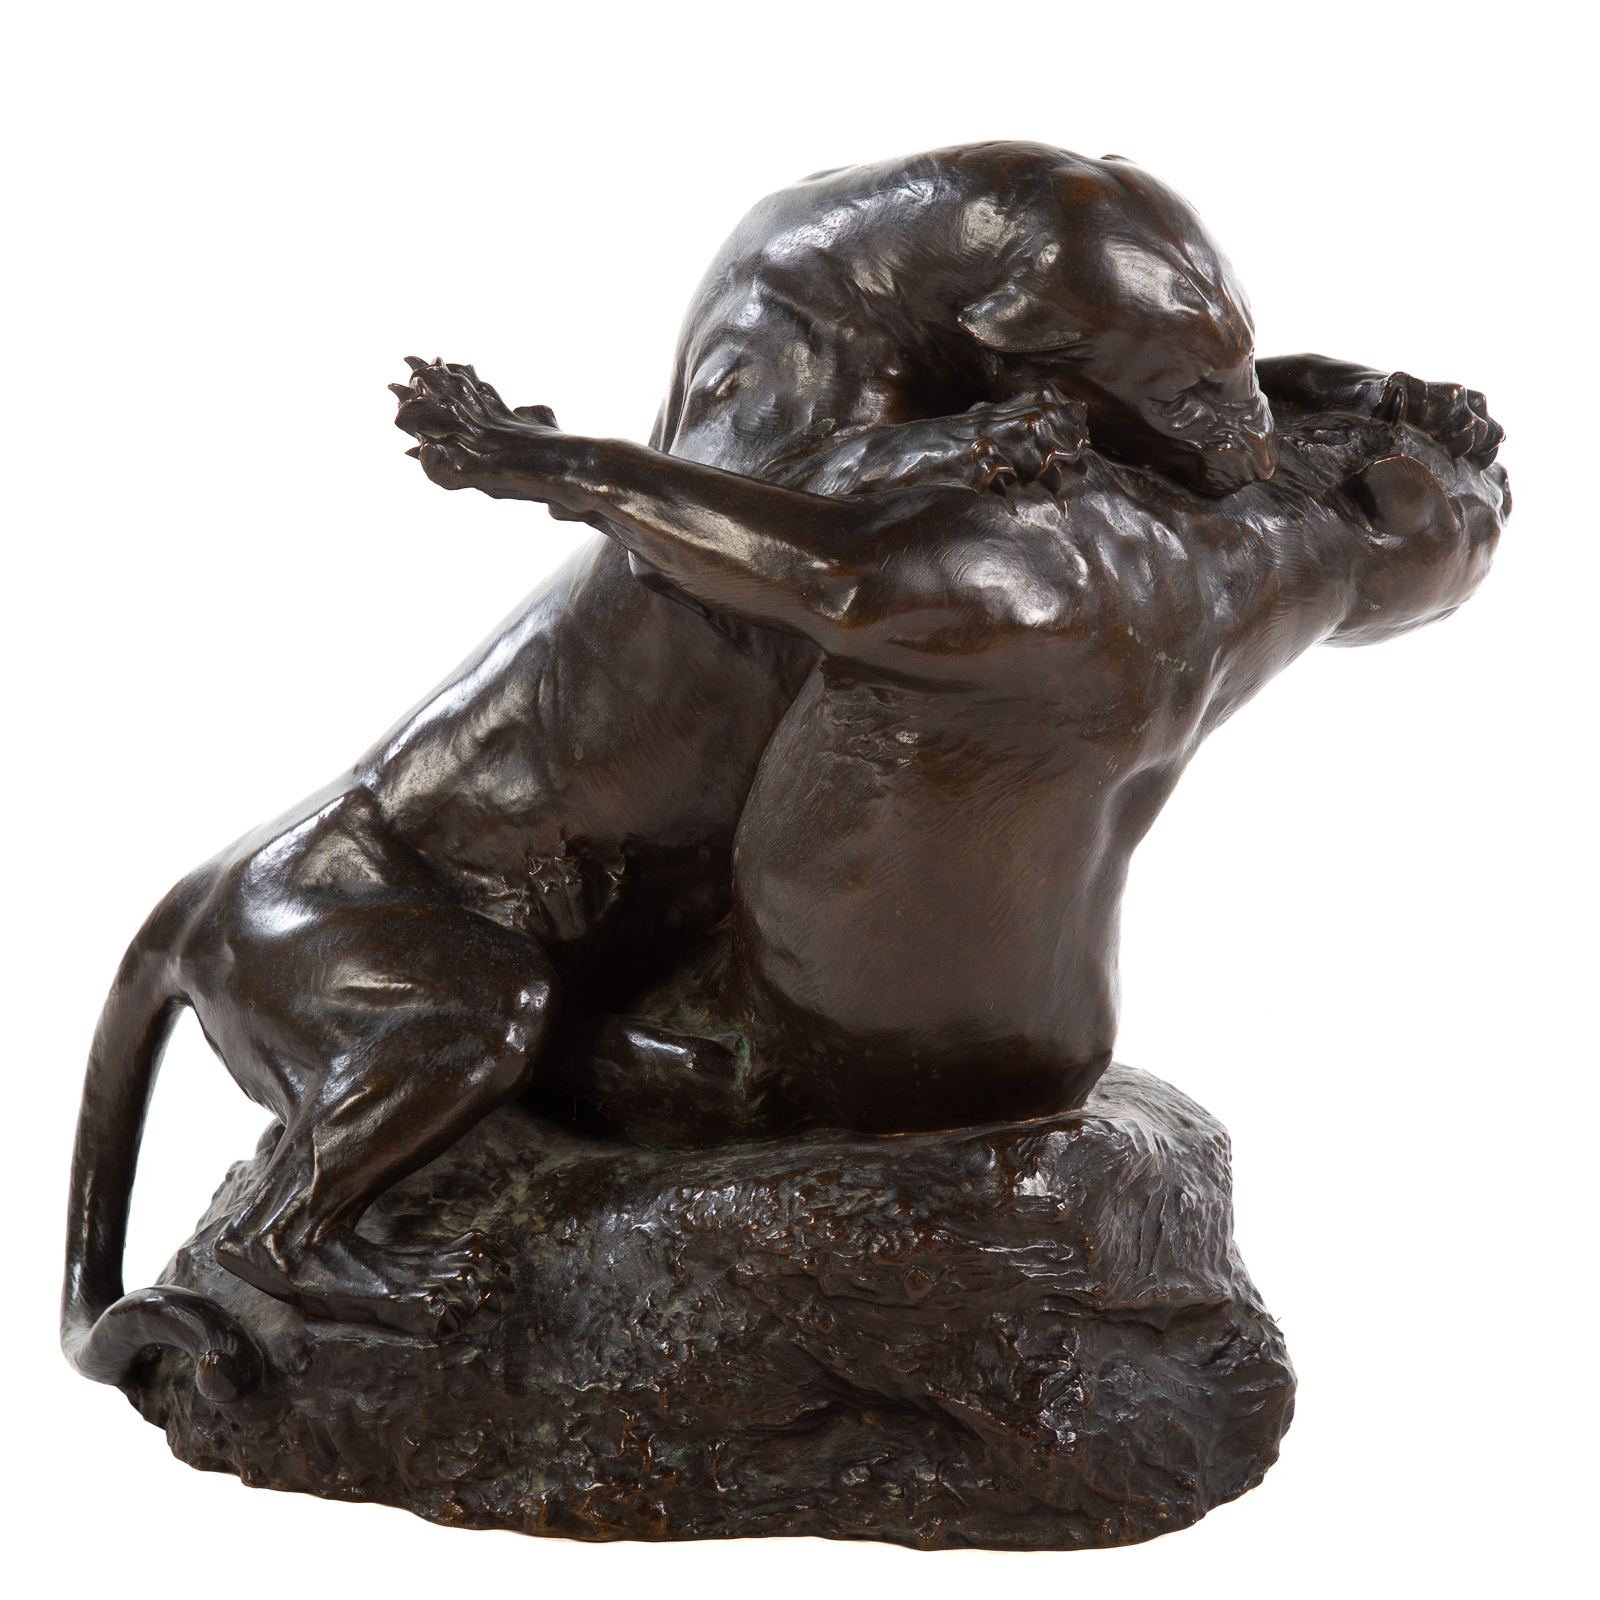 GEORGES GARDET, FIGHTING PANTHERS BRONZE